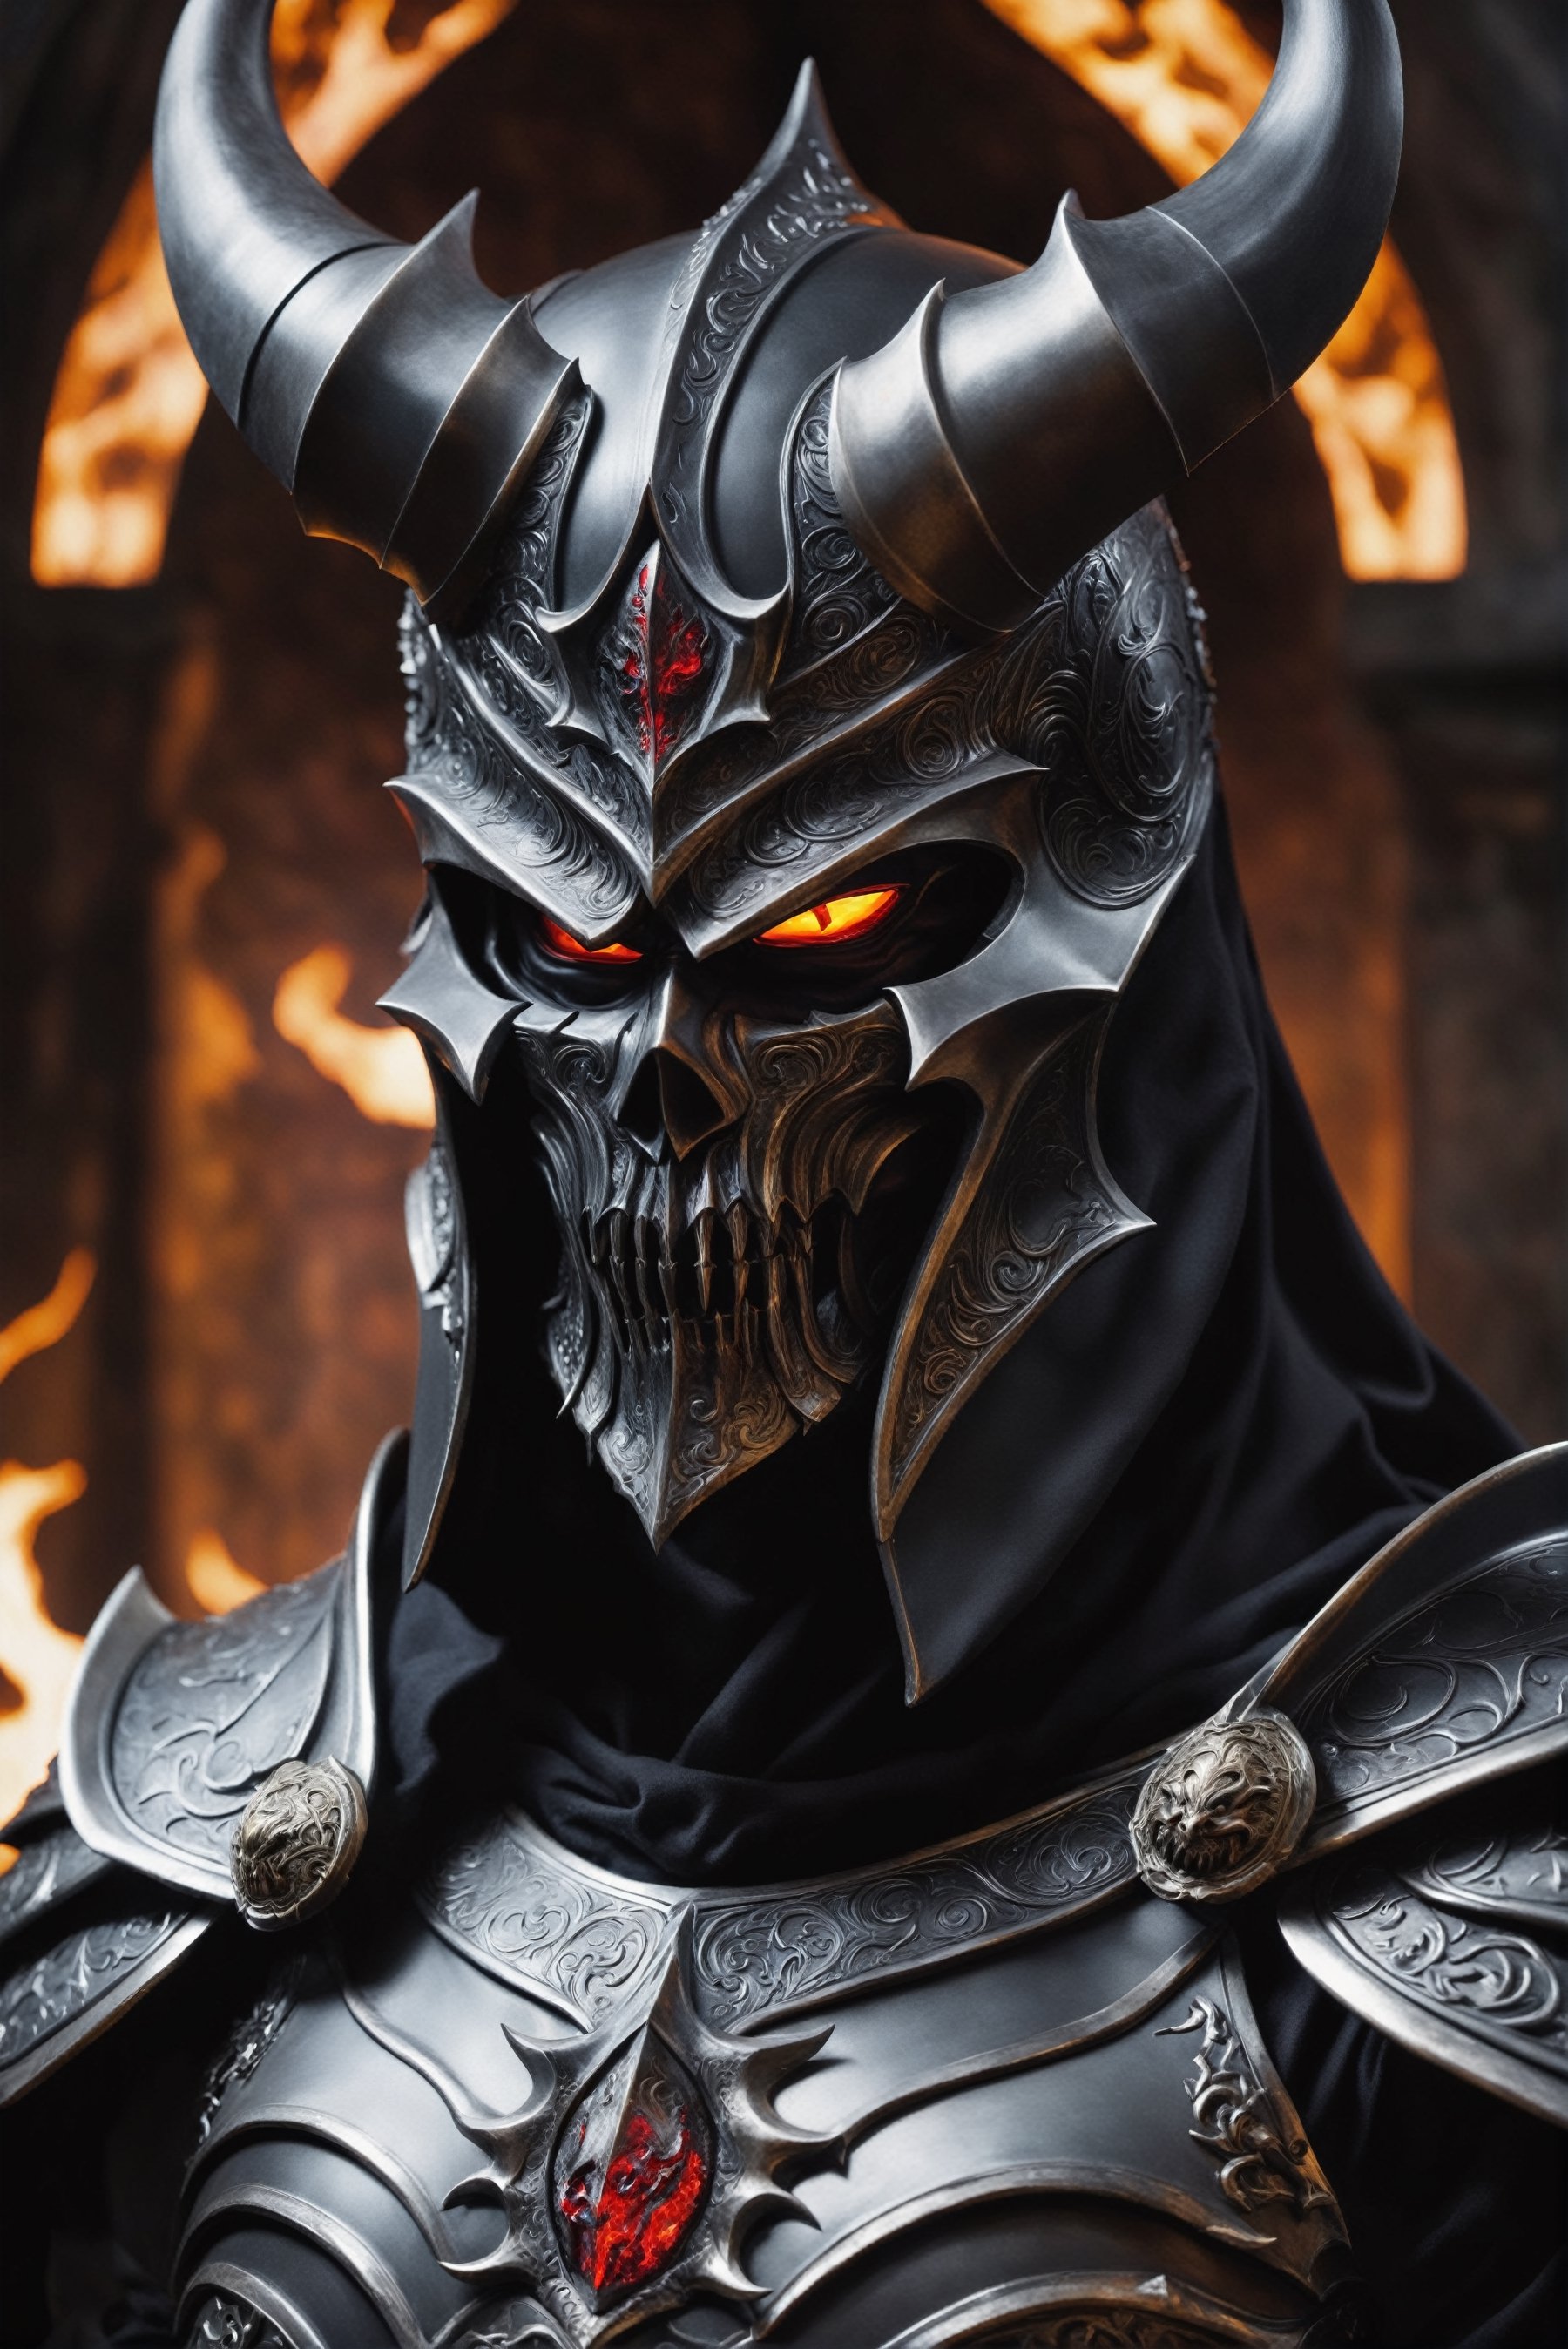 Generate hyper realistic image Experience the chilling presence of a hyper-realistic demonic entity, standing with an aura of malevolent authority. The figure is fully armored, with the hood shrouding most facial details, leaving only glimpses of demonic features through the fearsome helmet. The demonic presence is intensified by the intricate design of the breastplate, gauntlets, and shoulder armor, each element exuding an ominous and otherworldly quality. In the demon's grip rests a formidable weapon, adding to the air of threat and power. The menacing figure is enveloped in a sinister black cape, billowing ominously and creating a stark contrast to the dark and intricate demonic armor. This hyper-realistic image captures the essence of a malevolent force, with every detail meticulously rendered to evoke a sense of dread and awe in the viewer.